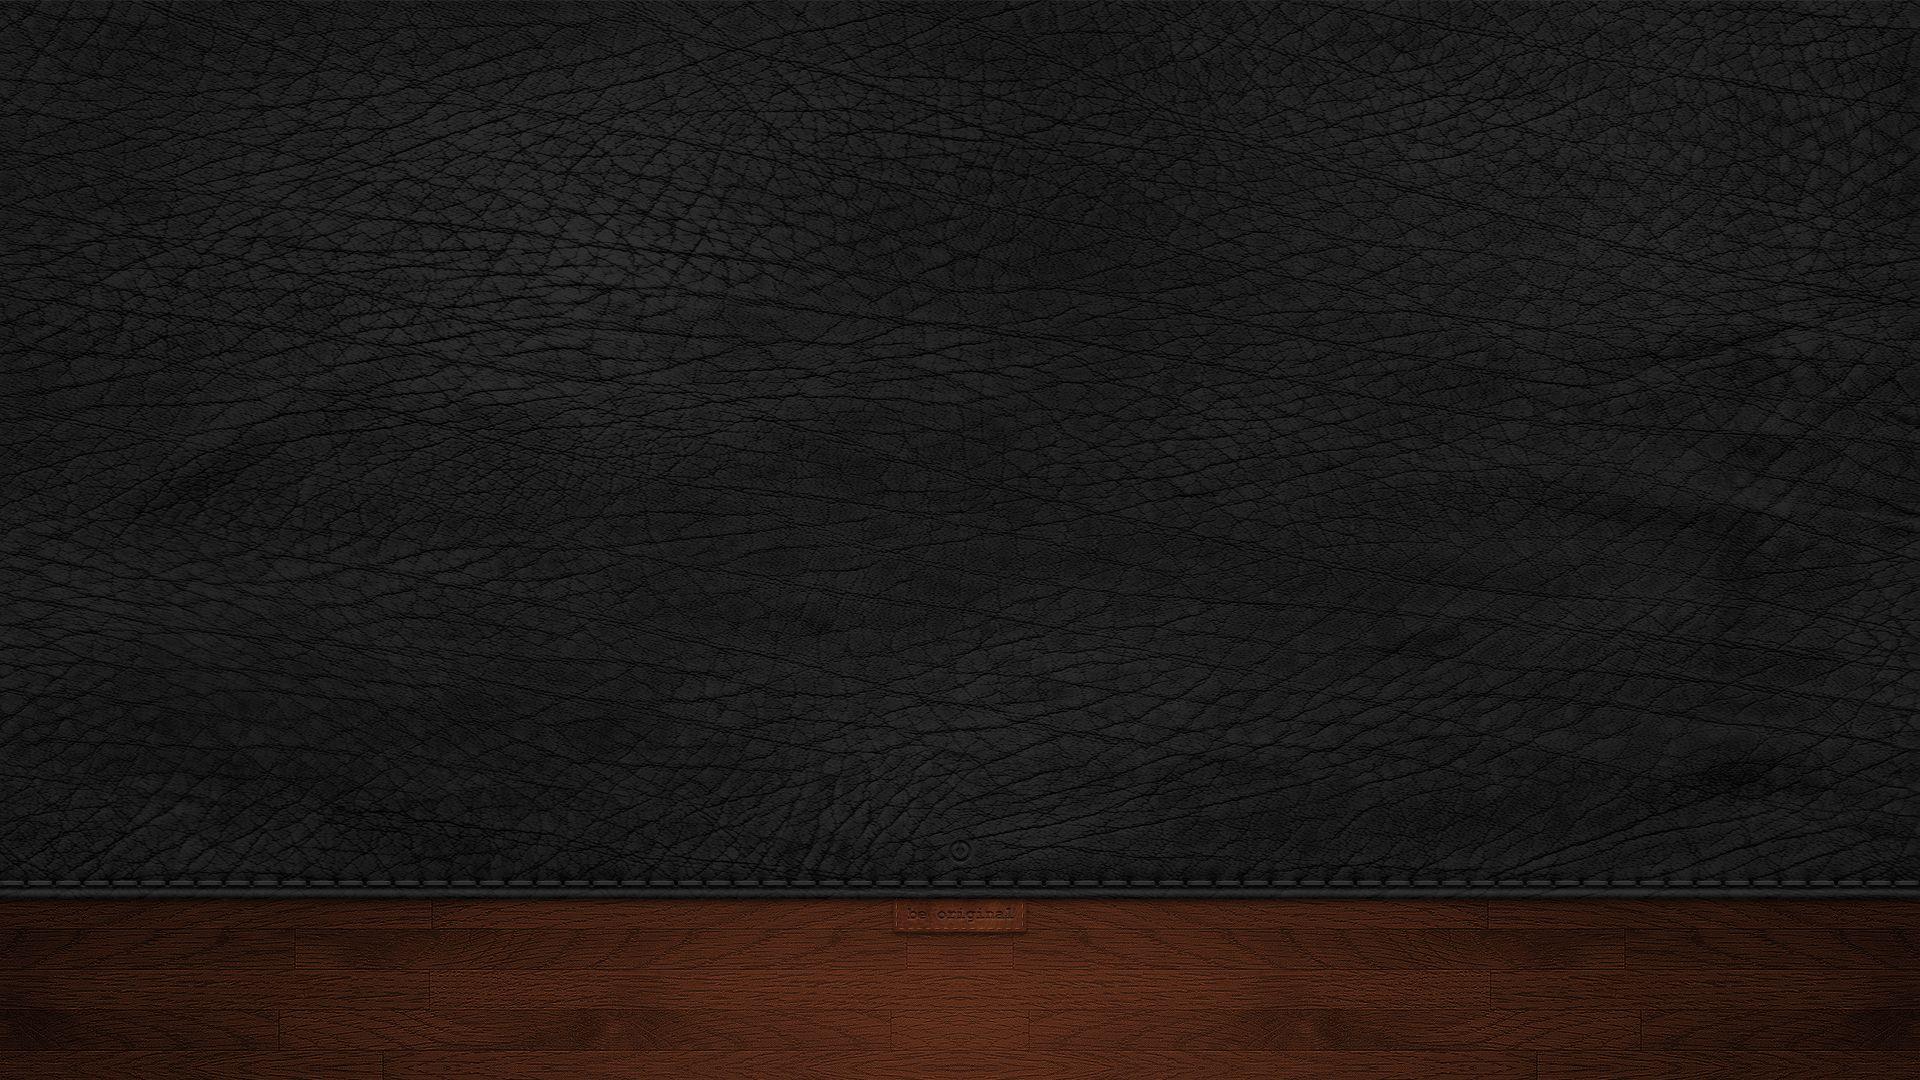 Leather Wallpaper 01 - [1920 x 1080]